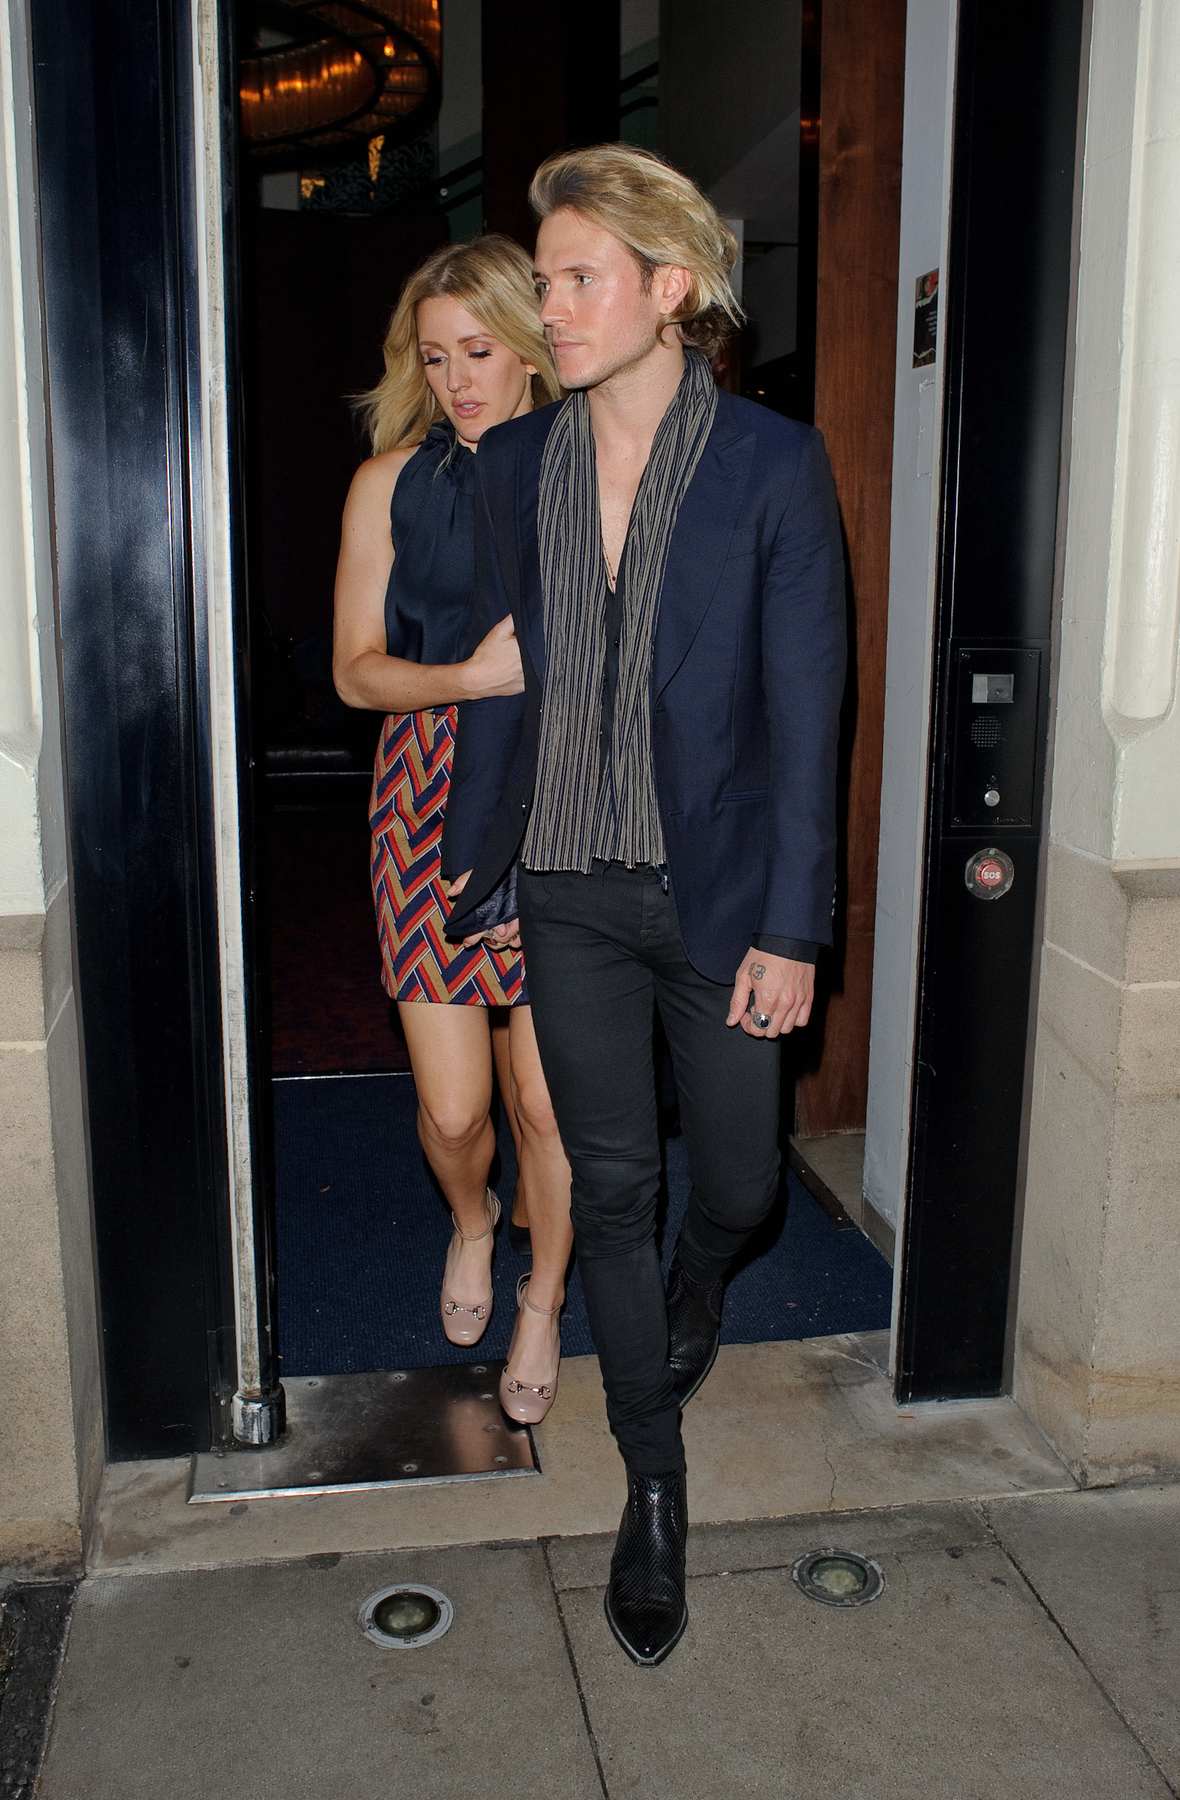 Elllie Goulding Hold On To Dougie Poynter As They Leave Hospital Club